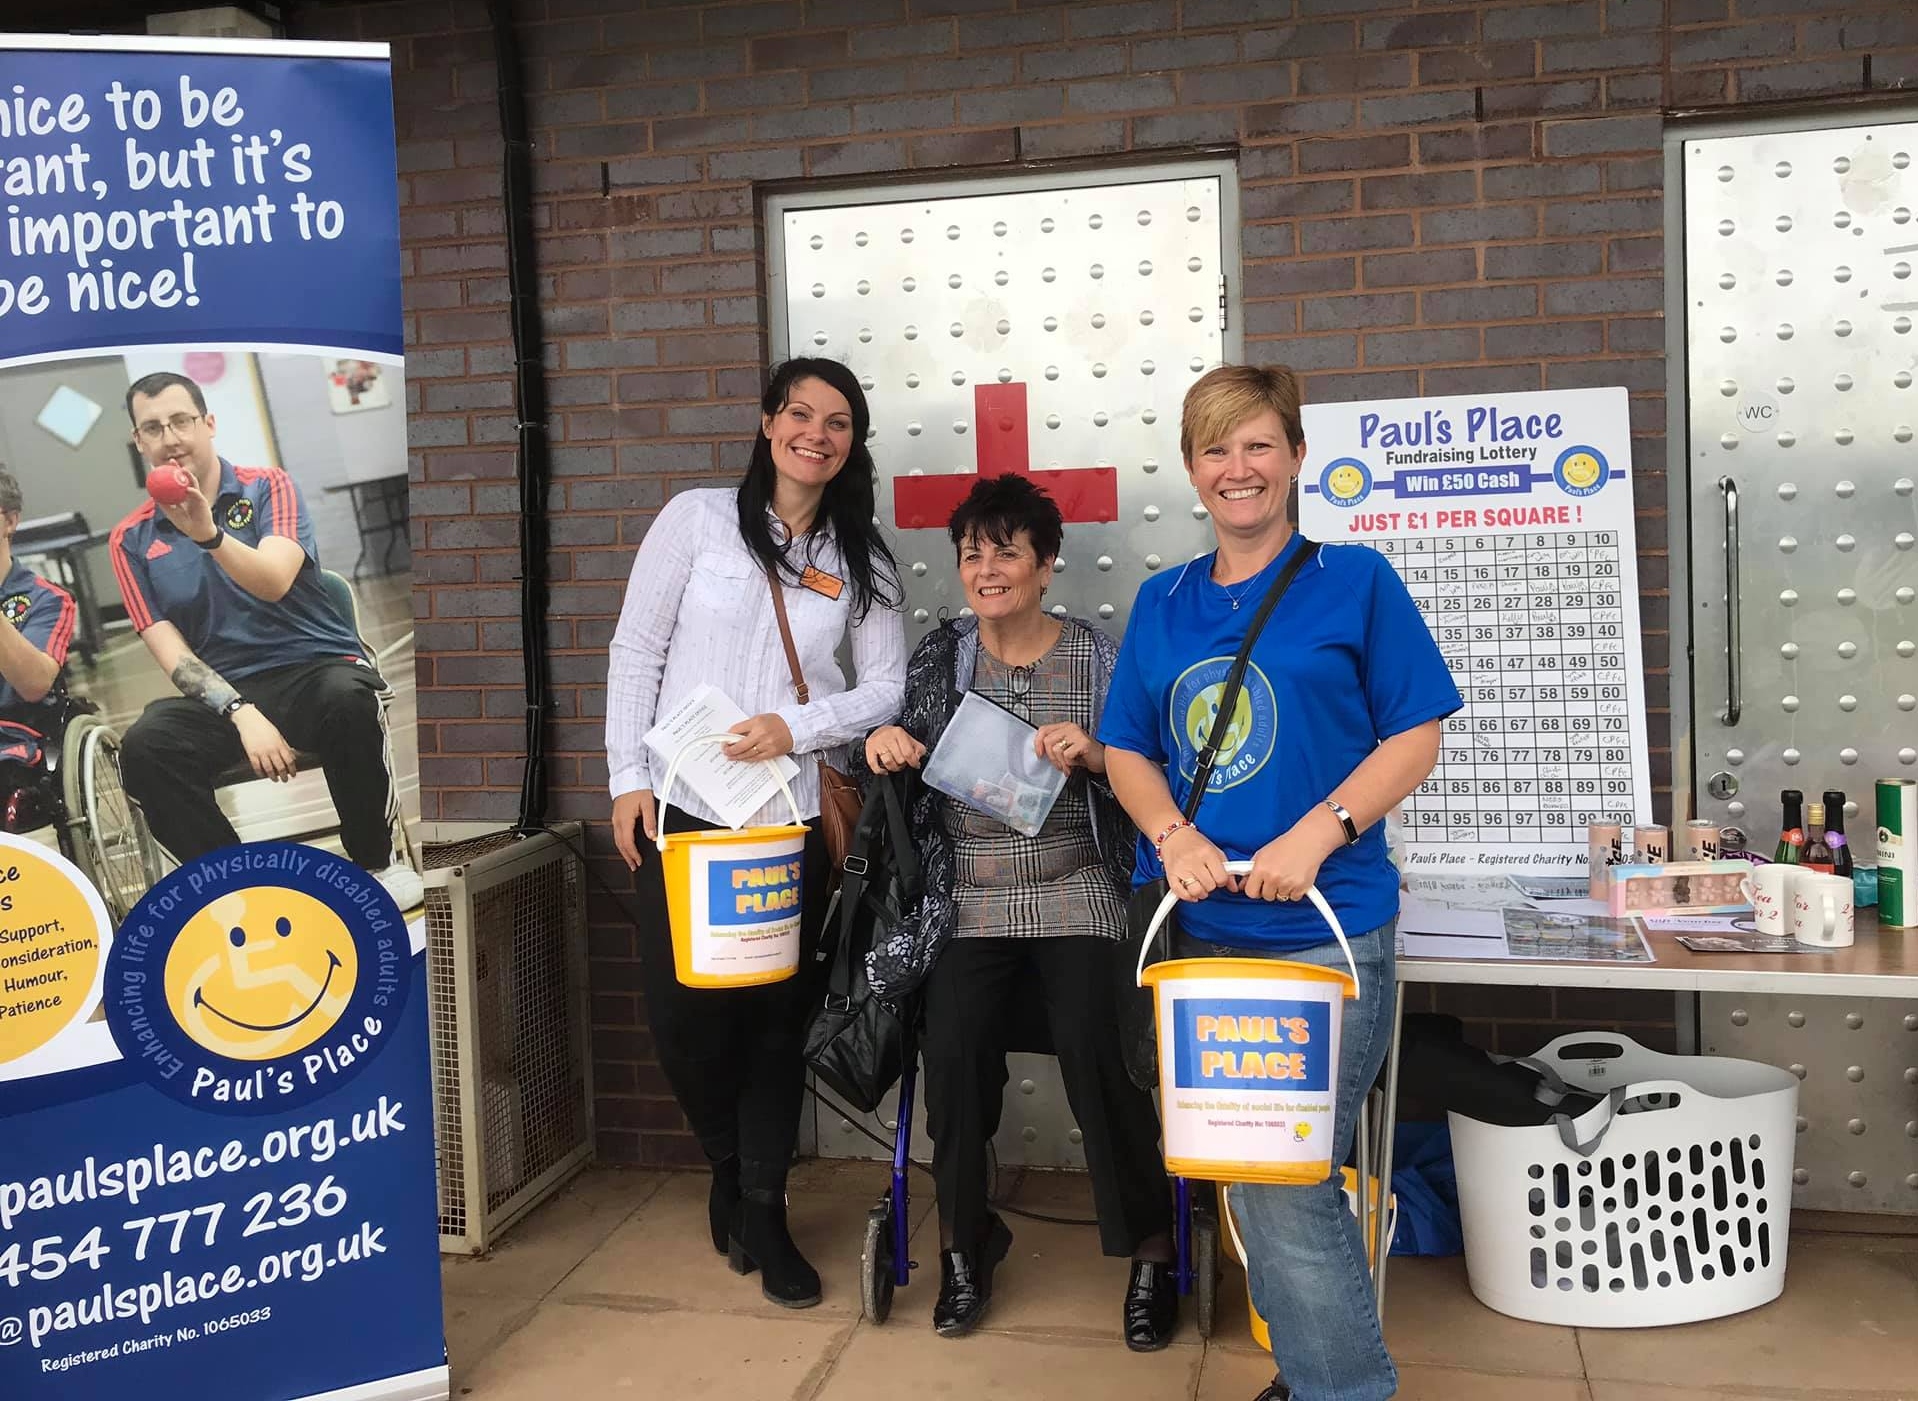 Staff and members fundraising with buckets and banners